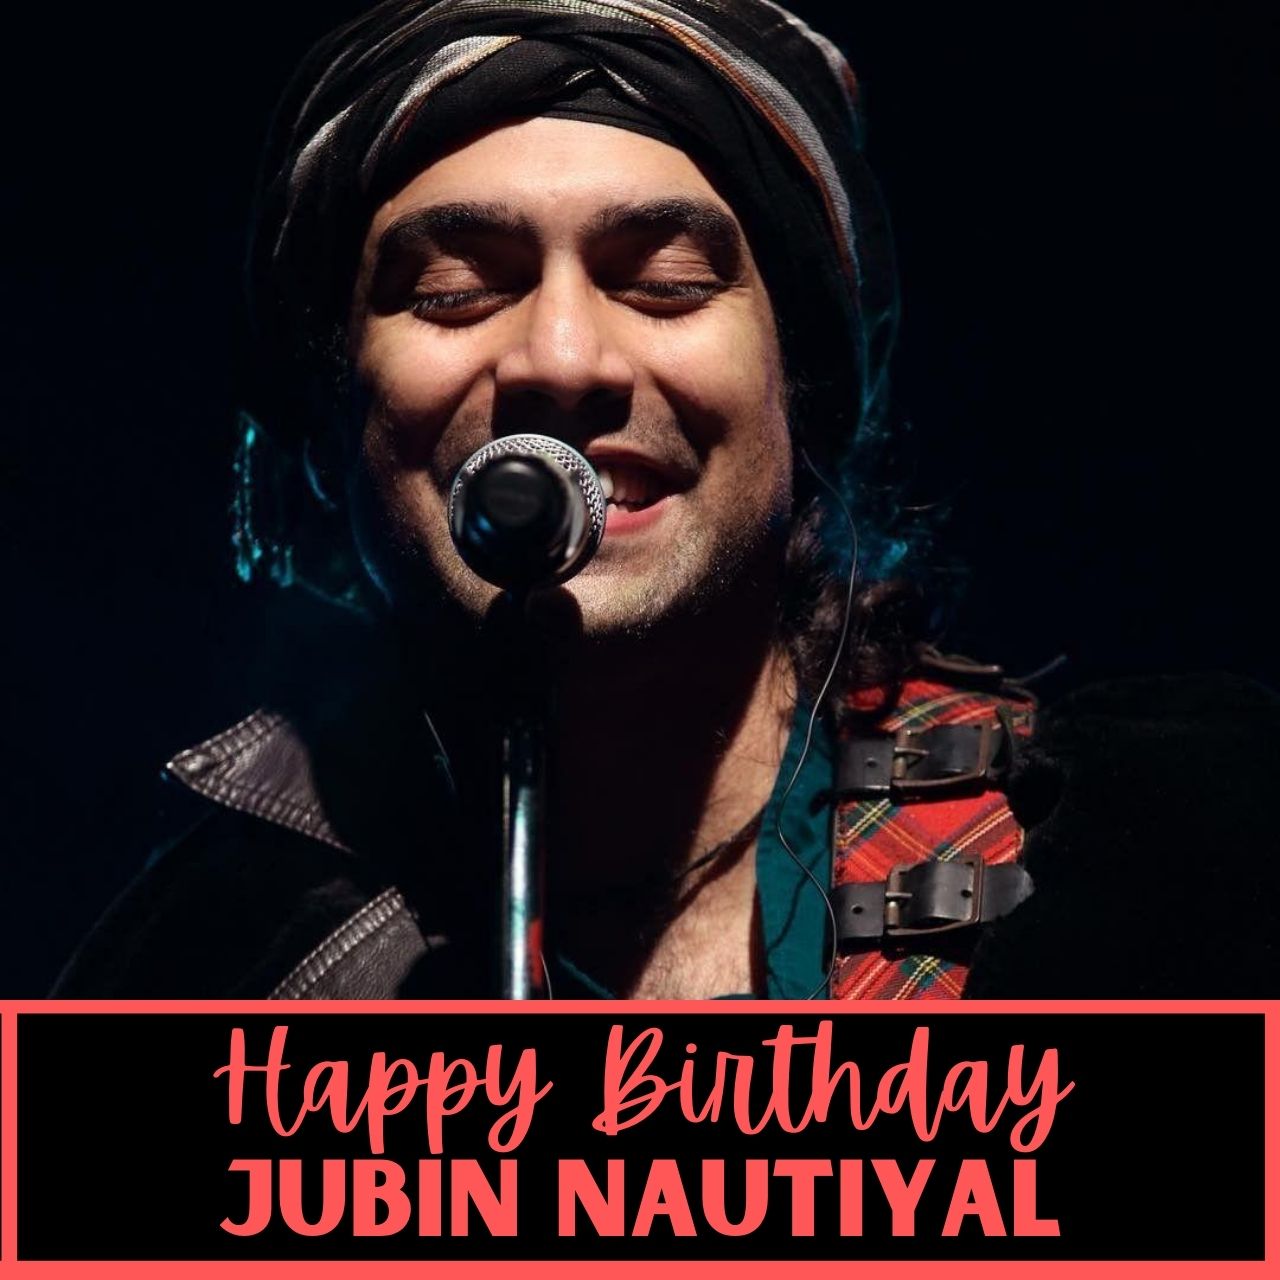 Jubin Nautiyal Birthday Wishes, Images (photos), Messages, and WhatsApp Status Video Download to greet your favorite Singer